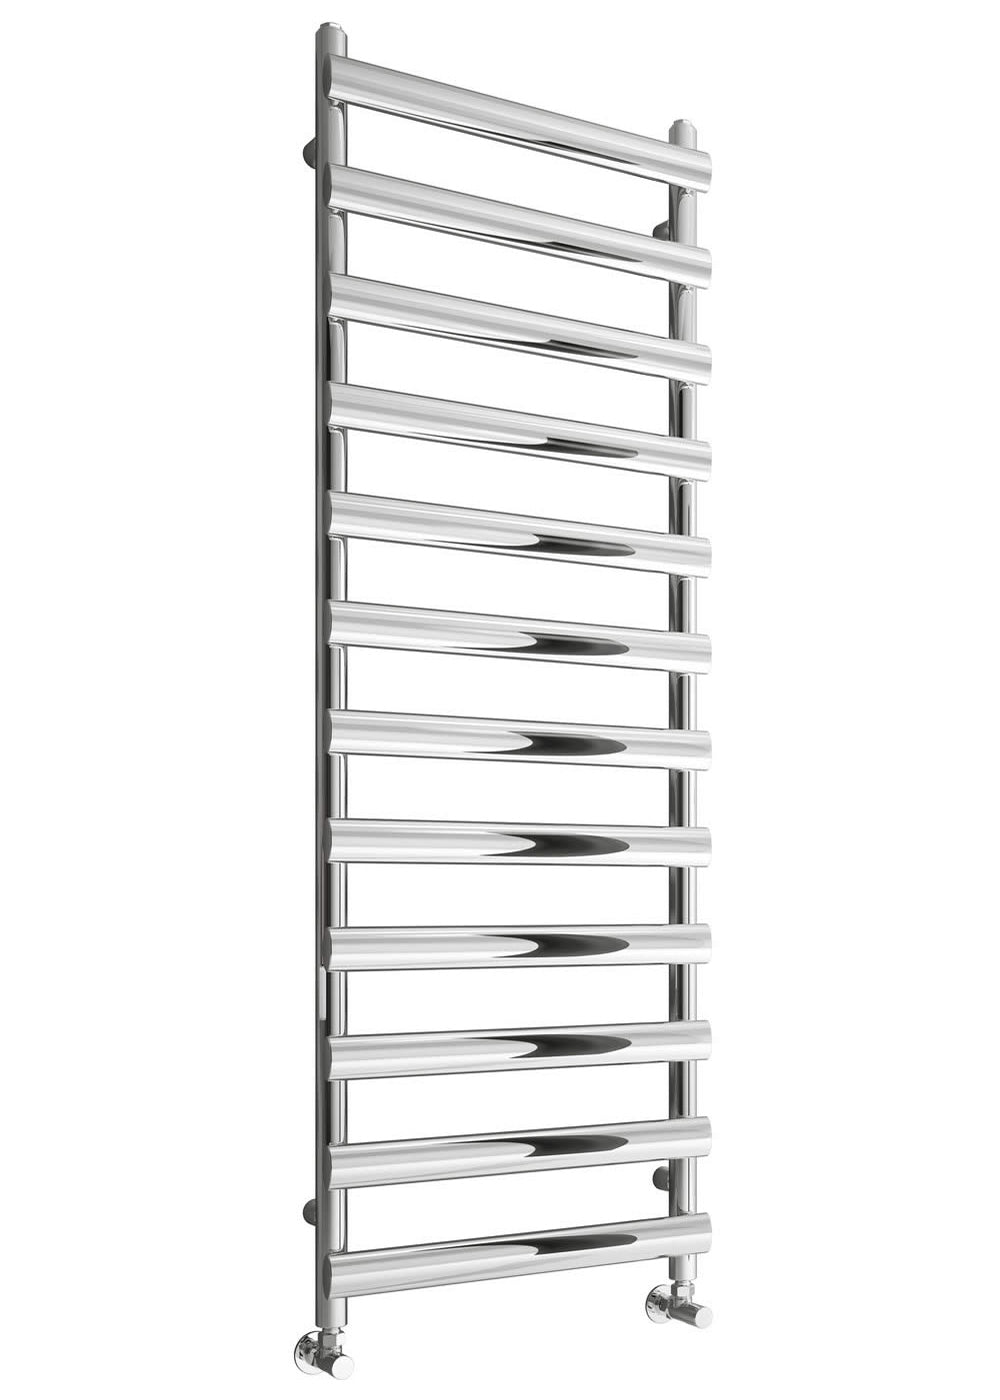 Deno Stainless Steel Heated Towel Rail - Various Sizes - Polished Stainless Steel